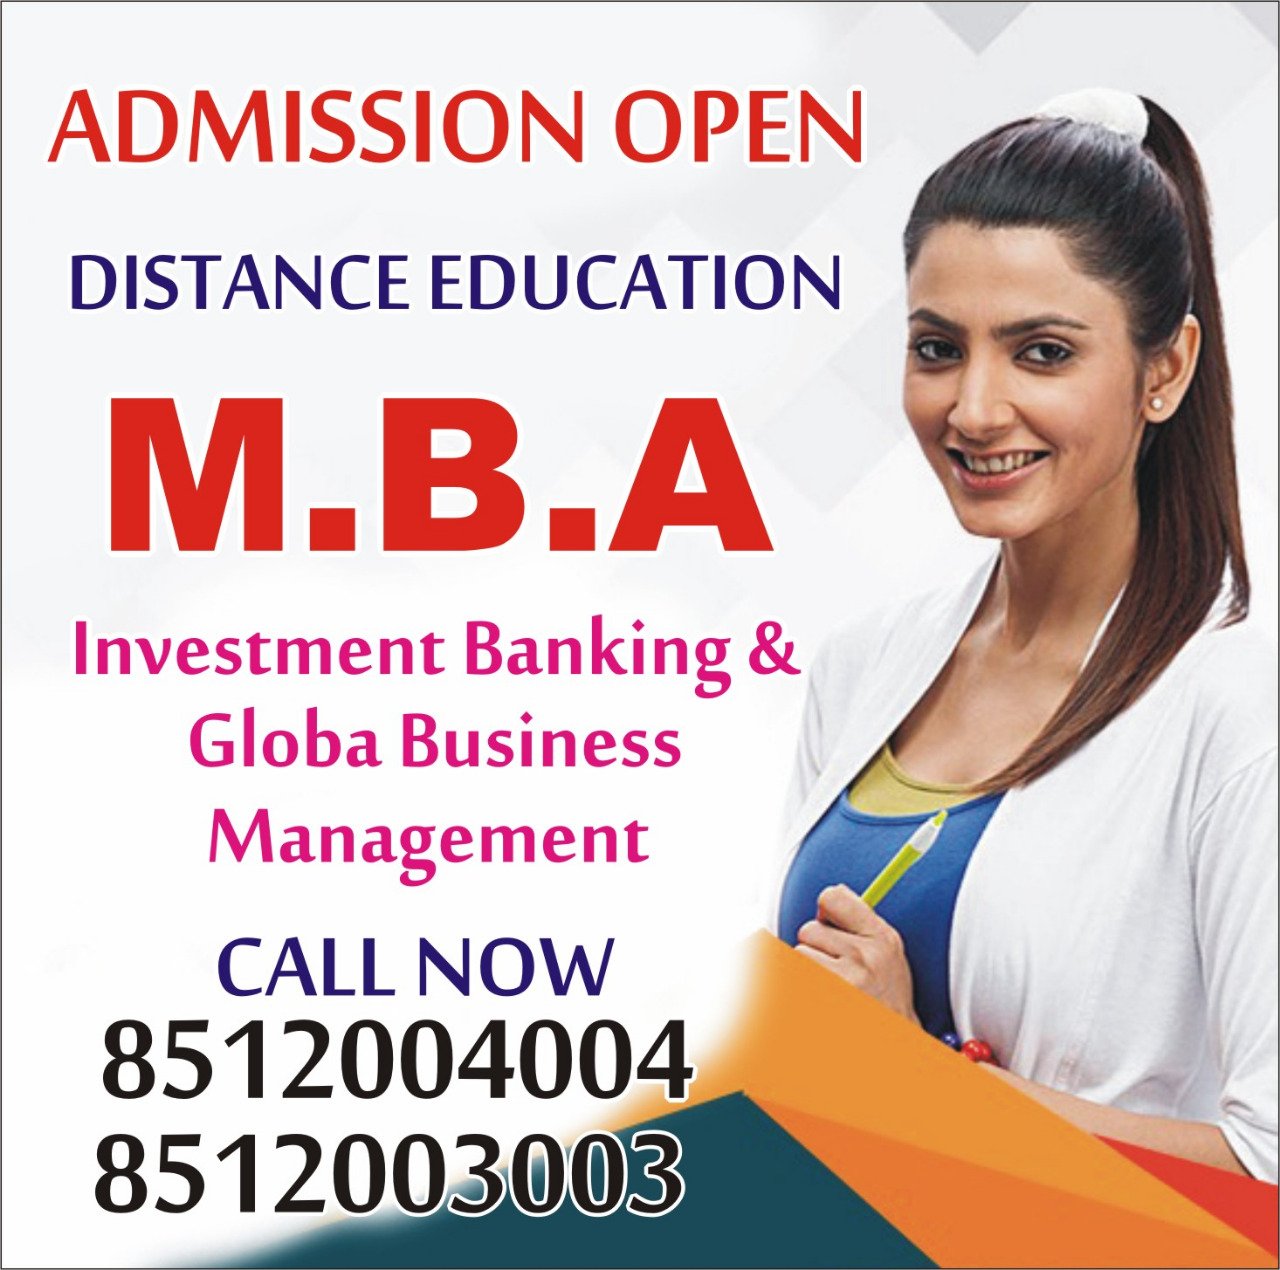 mba-Investment-banking-global-business-distance-education"